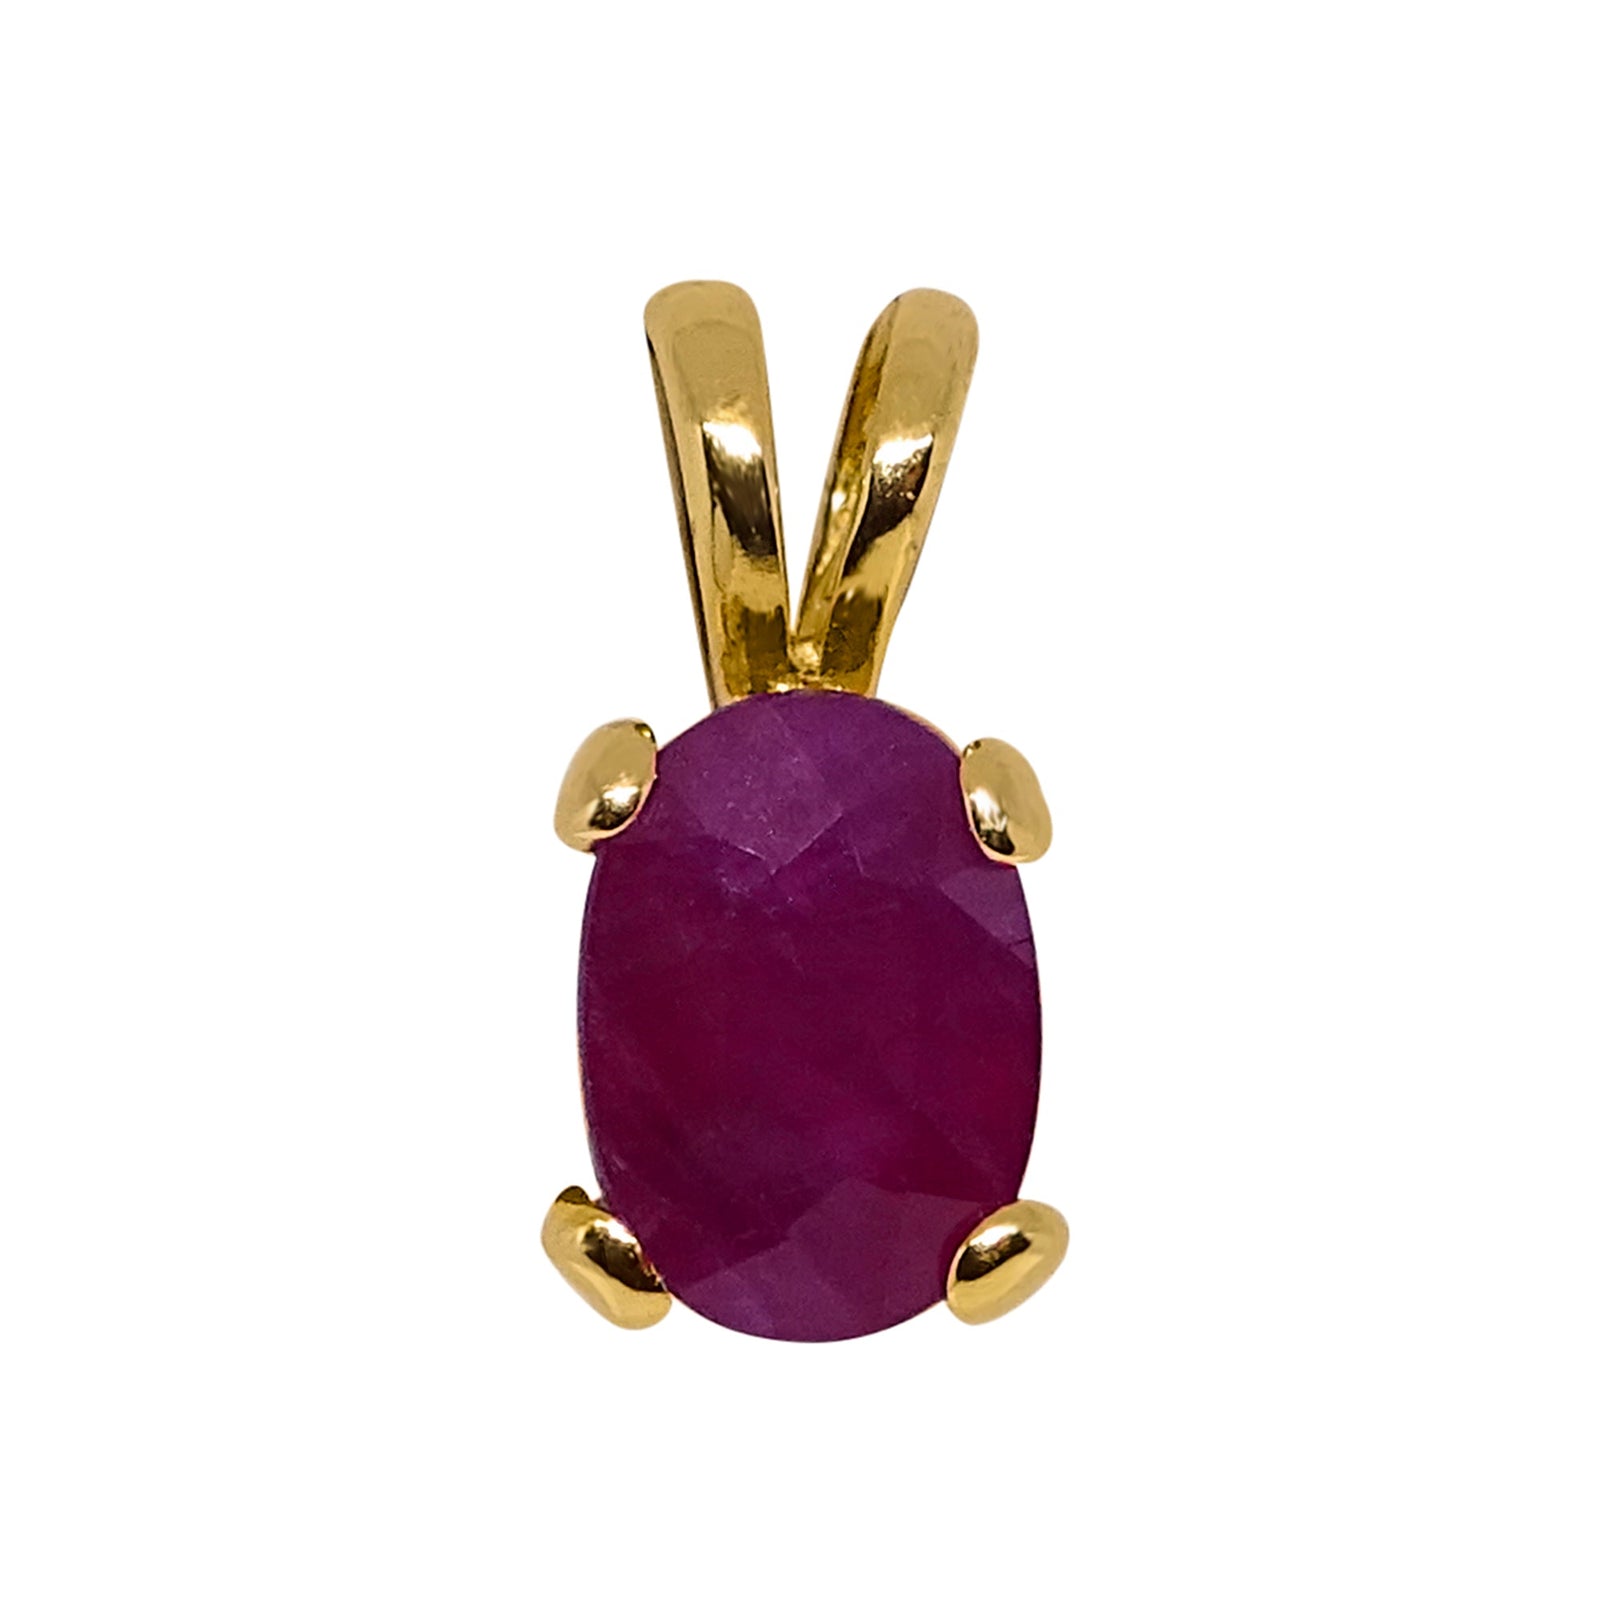 9ct gold 7x5mm oval ruby pendant